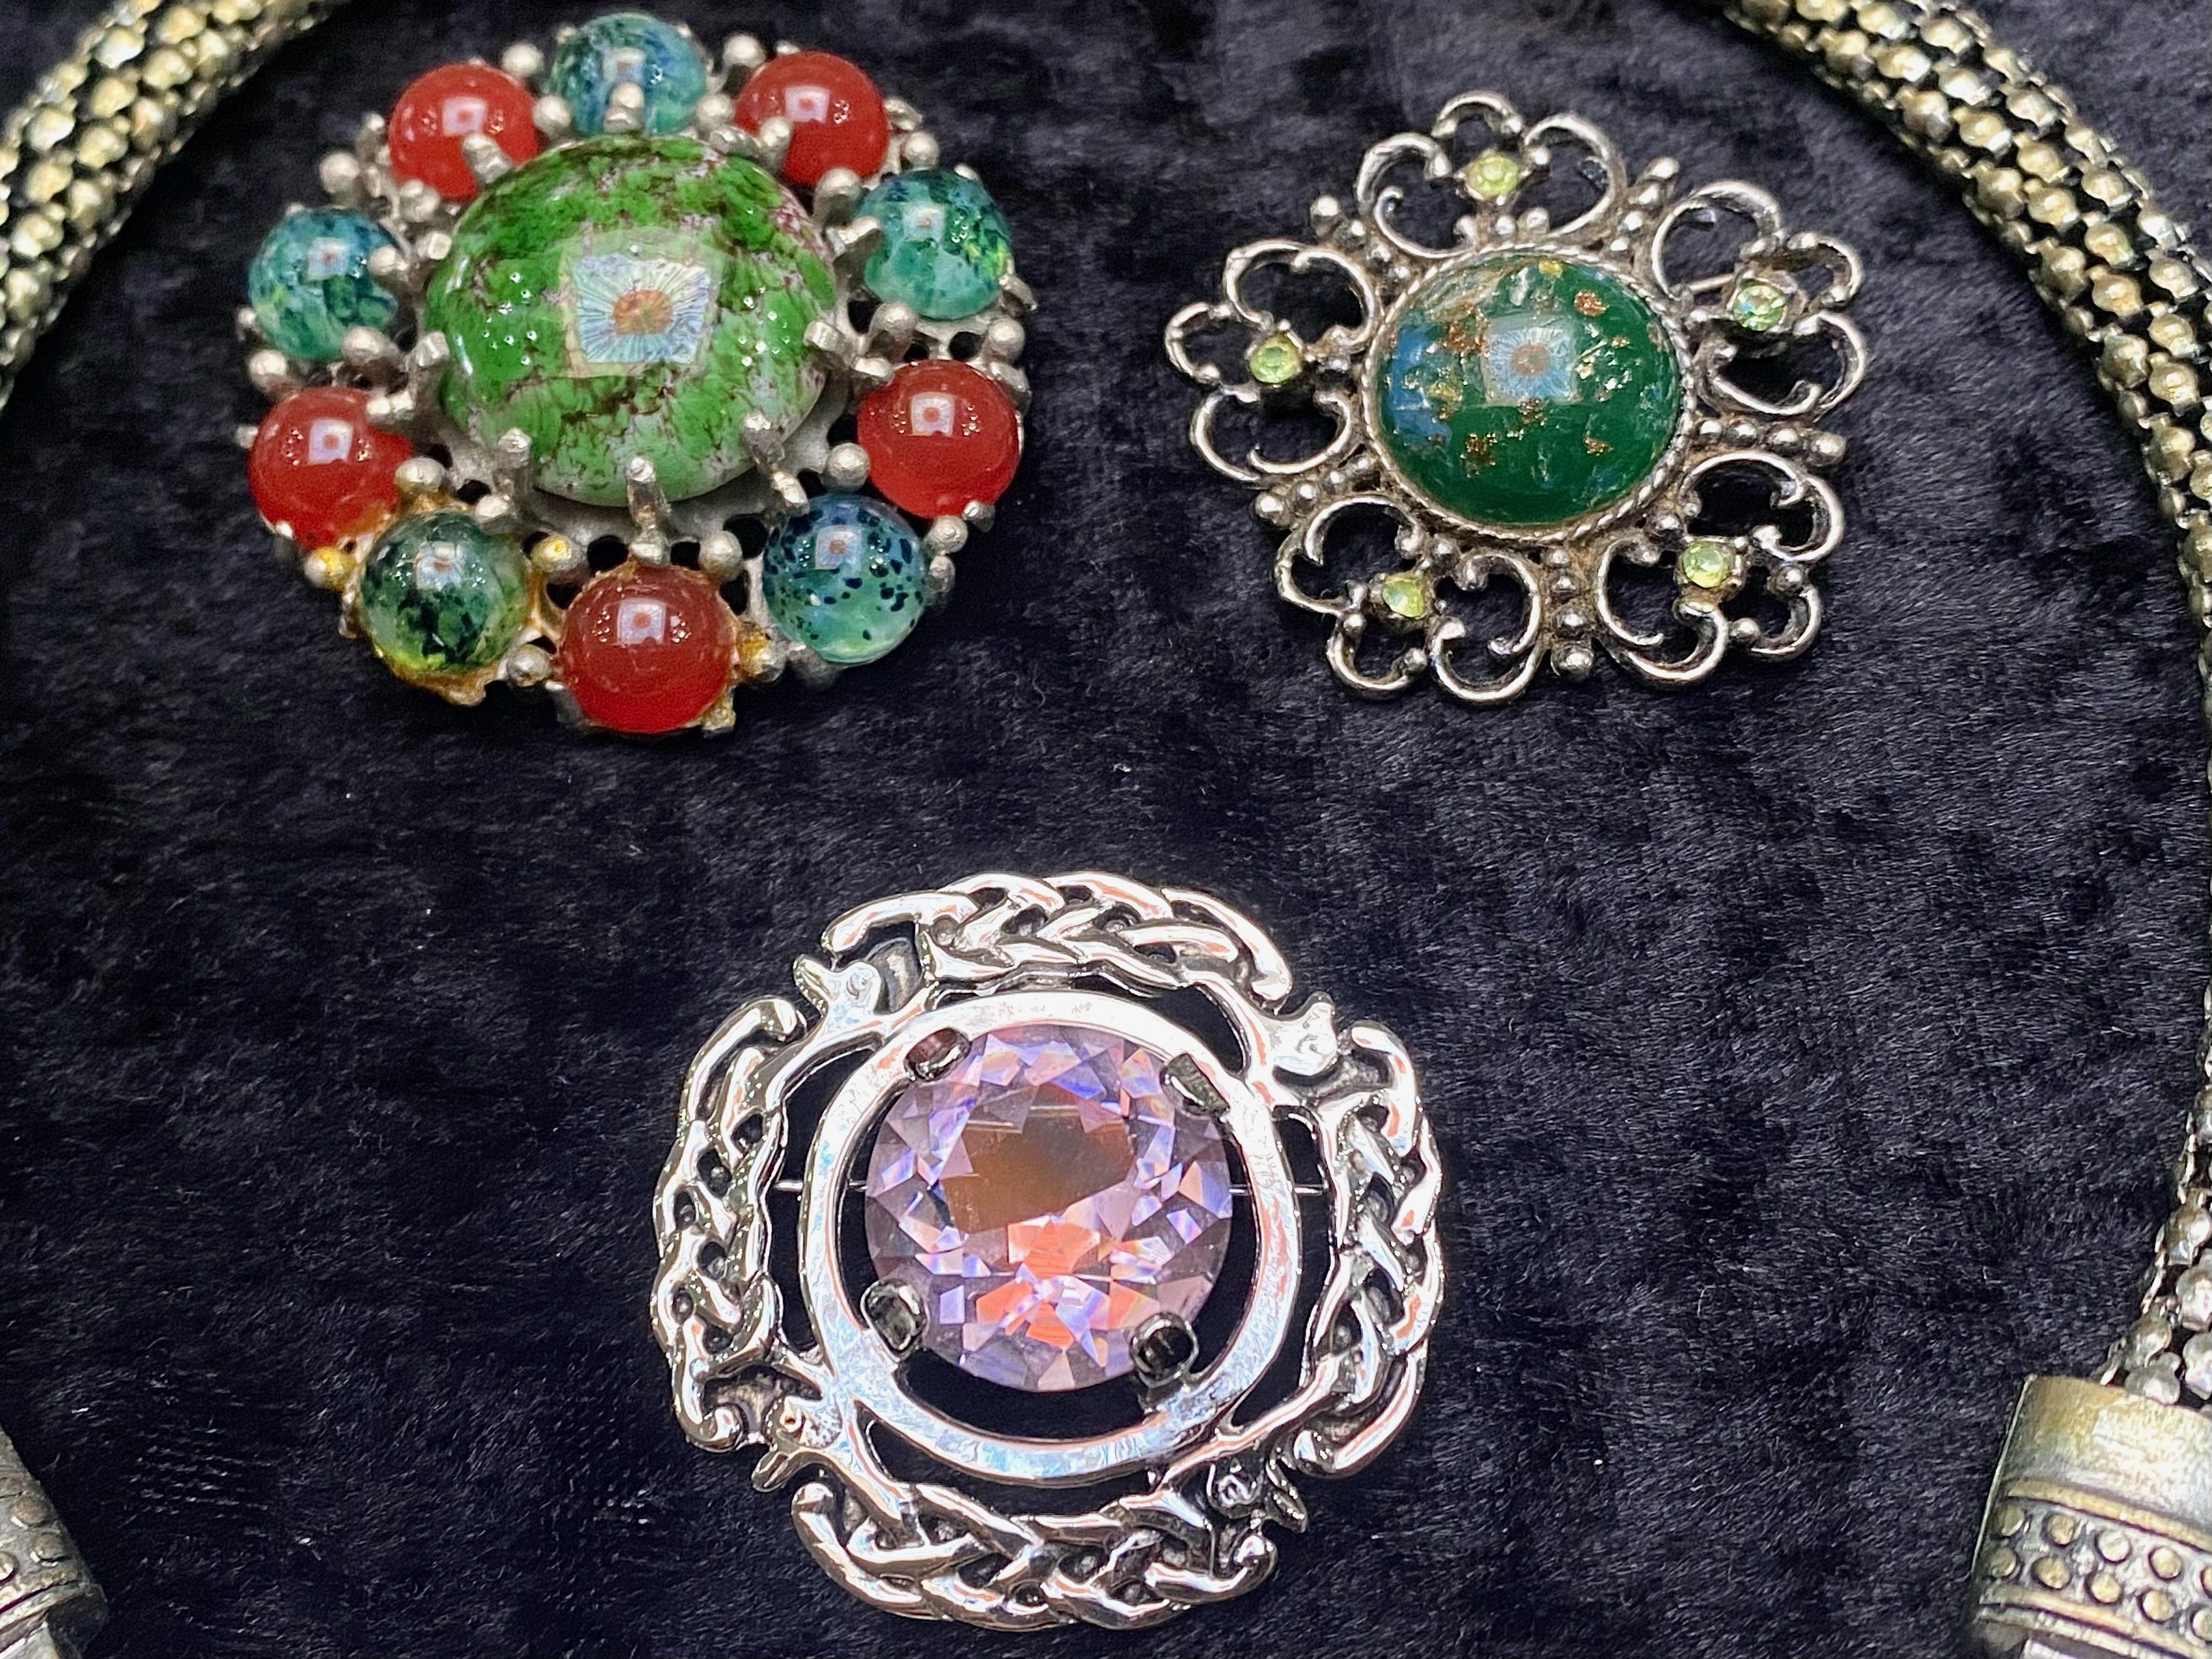 Collection of Scottish Inspired Brooches with some agates, cornelians and faux stones, - Image 4 of 5